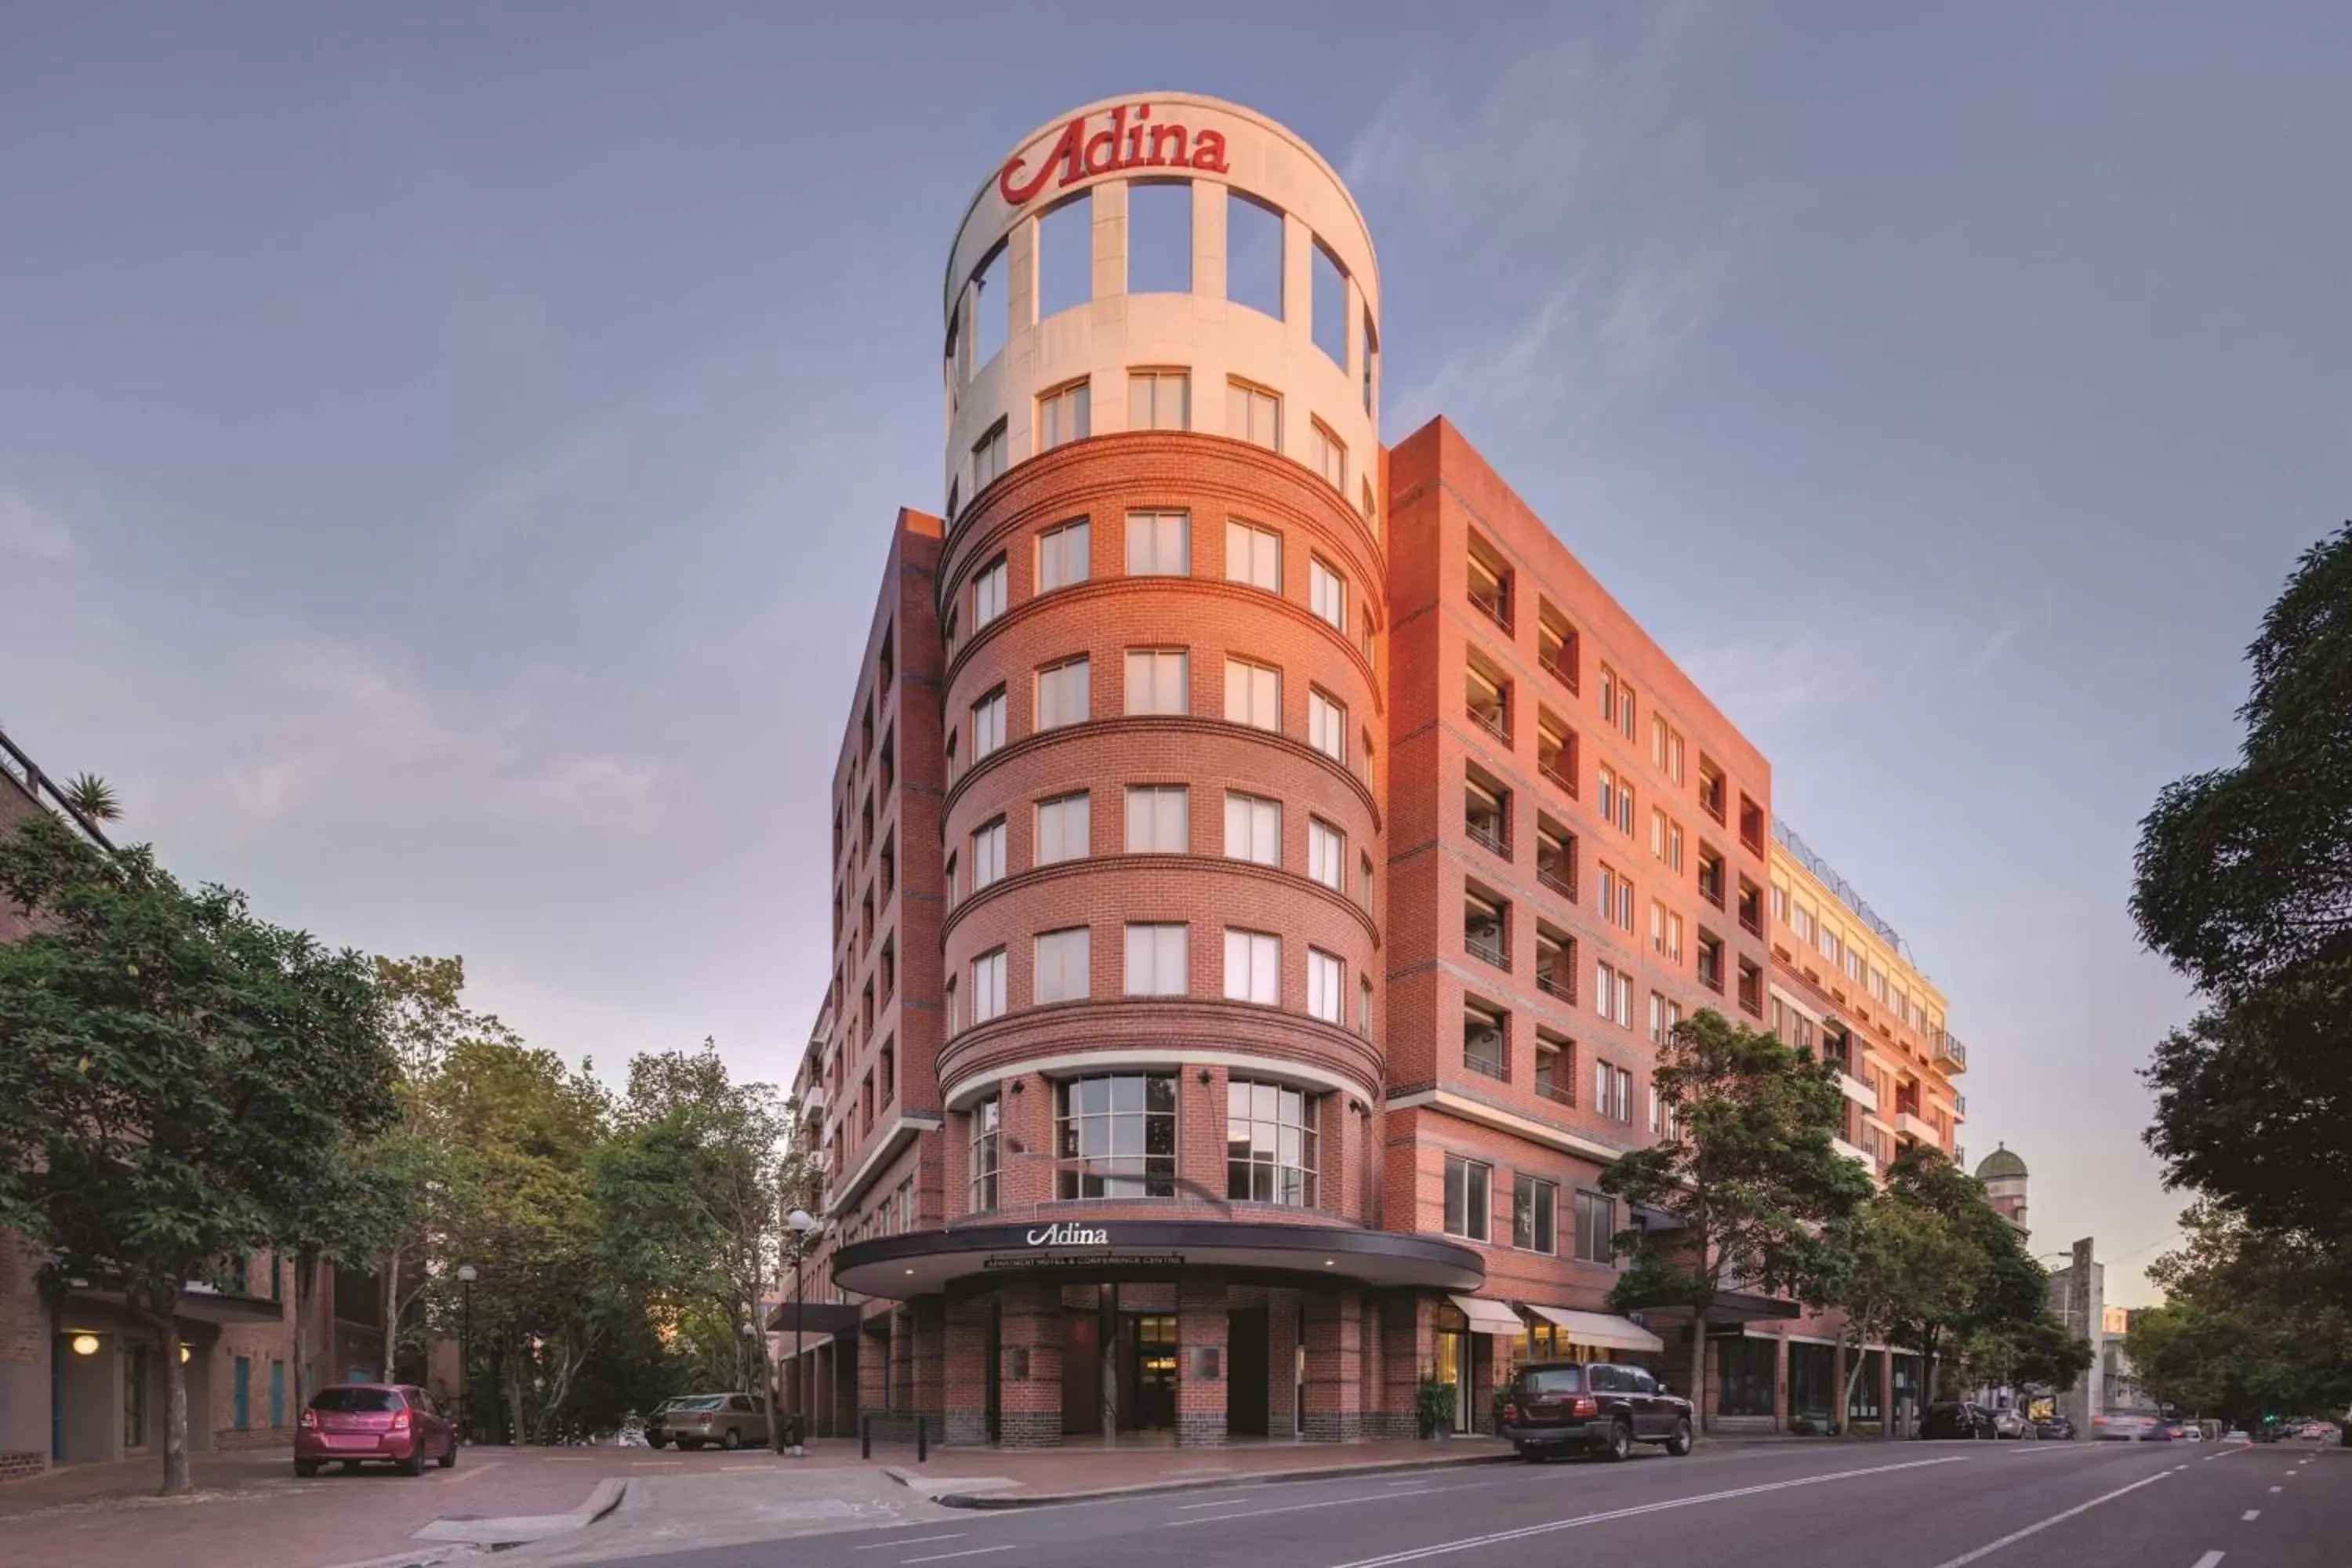 Property Building in Adina Apartment Hotel Sydney Surry Hills